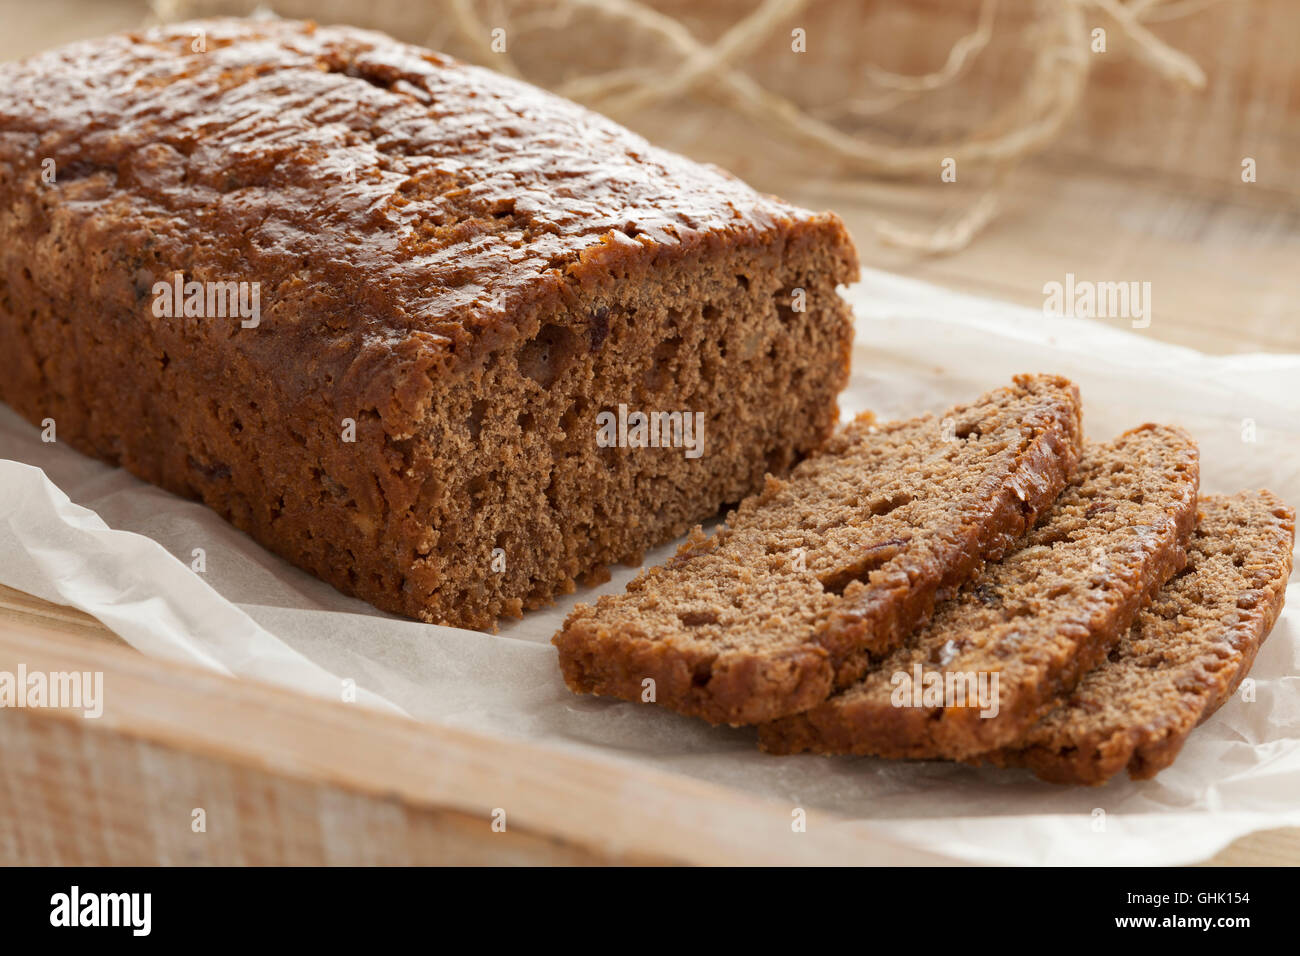 Traditional homemade gingerbread cake Stock Photo